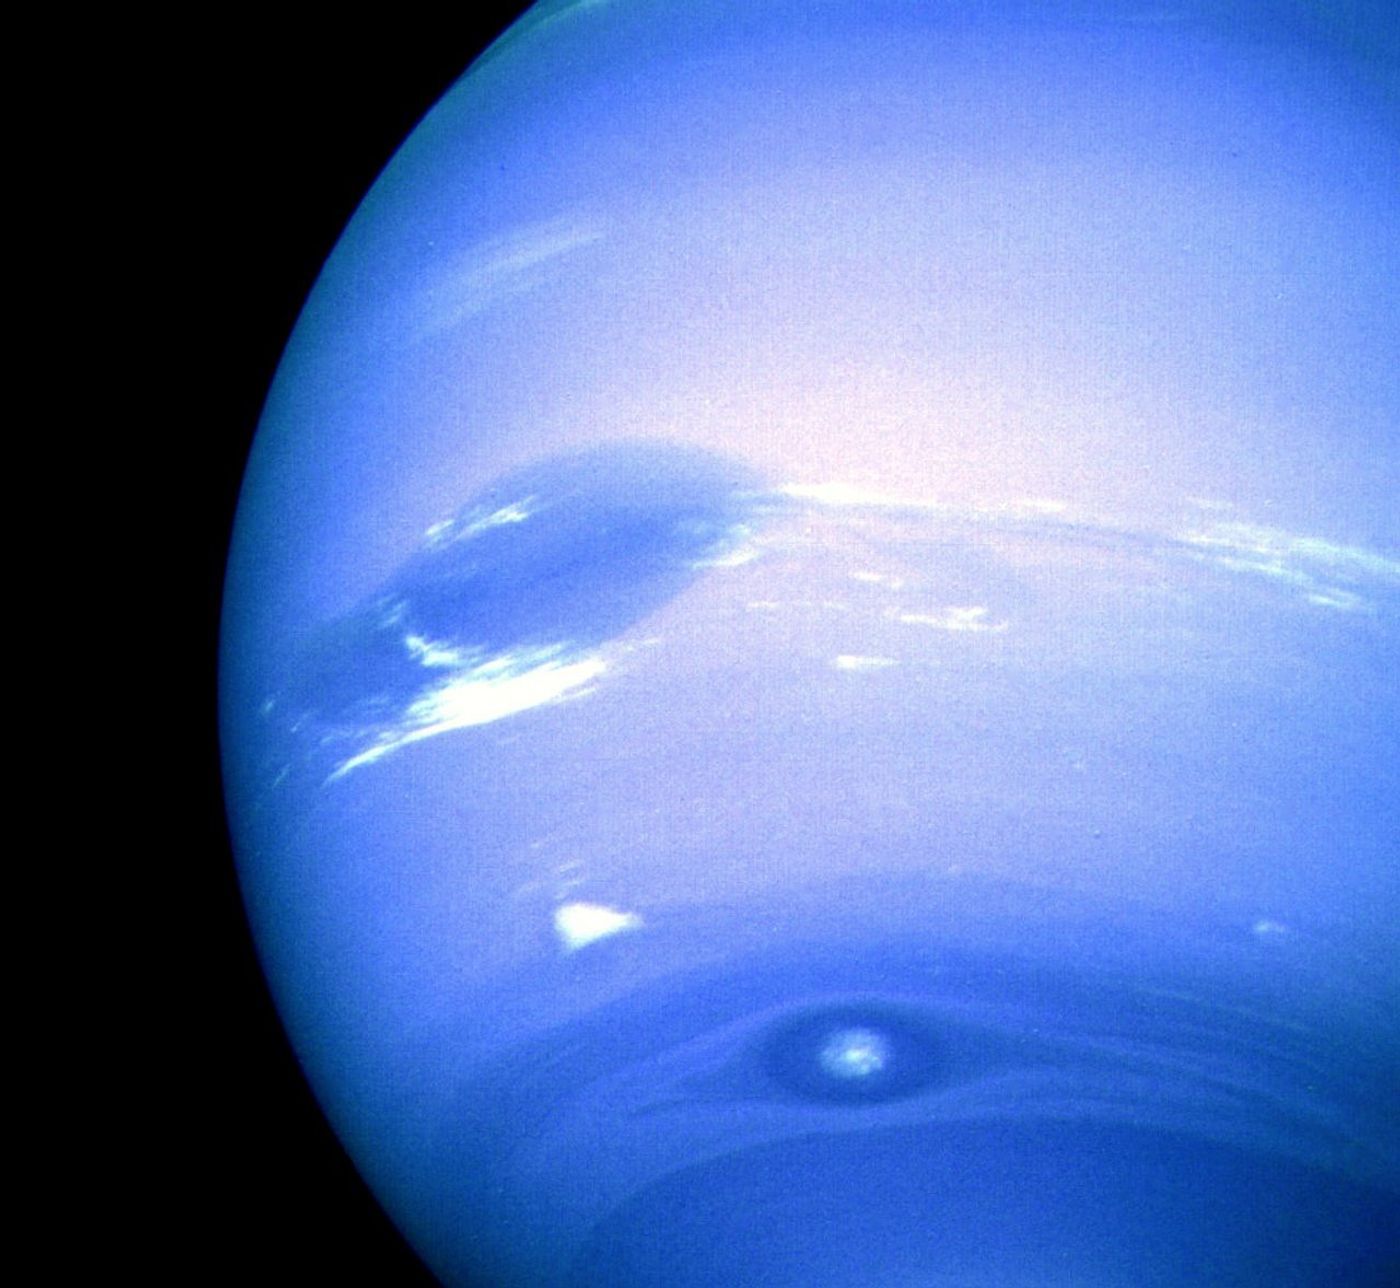 Neptune is one of the most distant known planets in the Solar System.